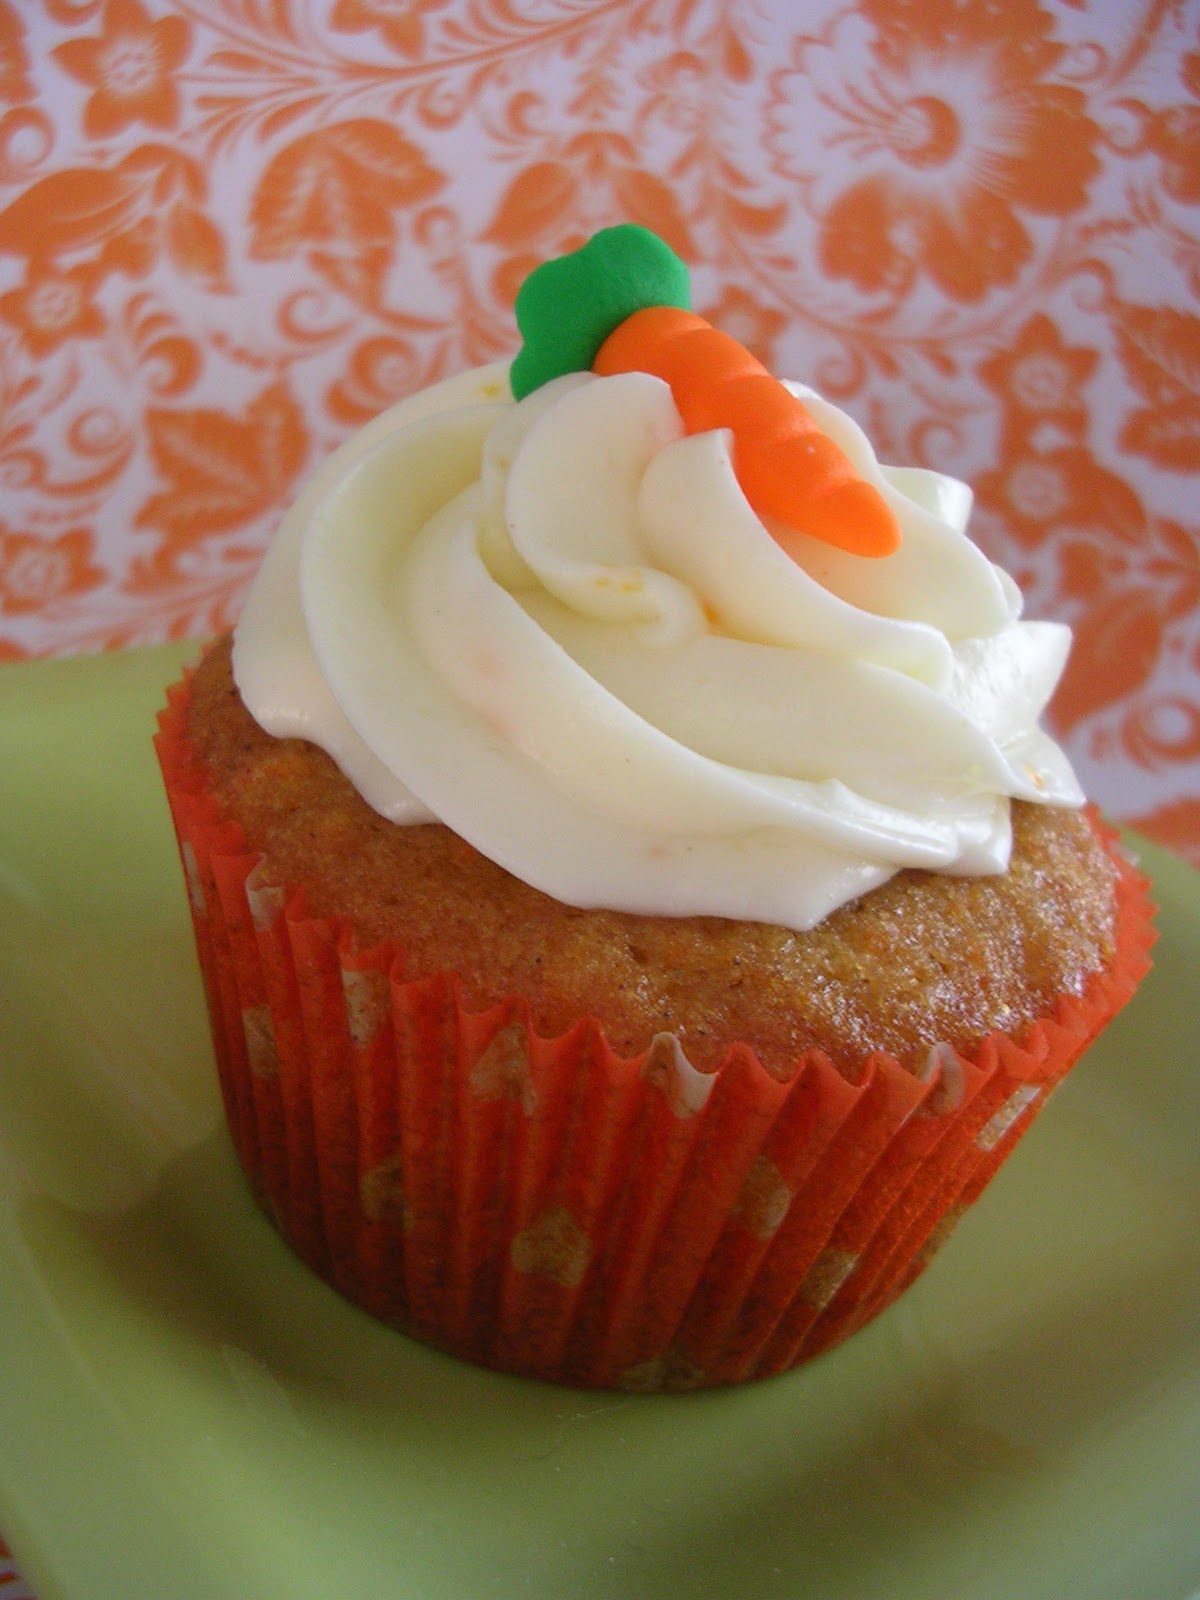 The Busty Baker: Carrot Cake Cupcakes